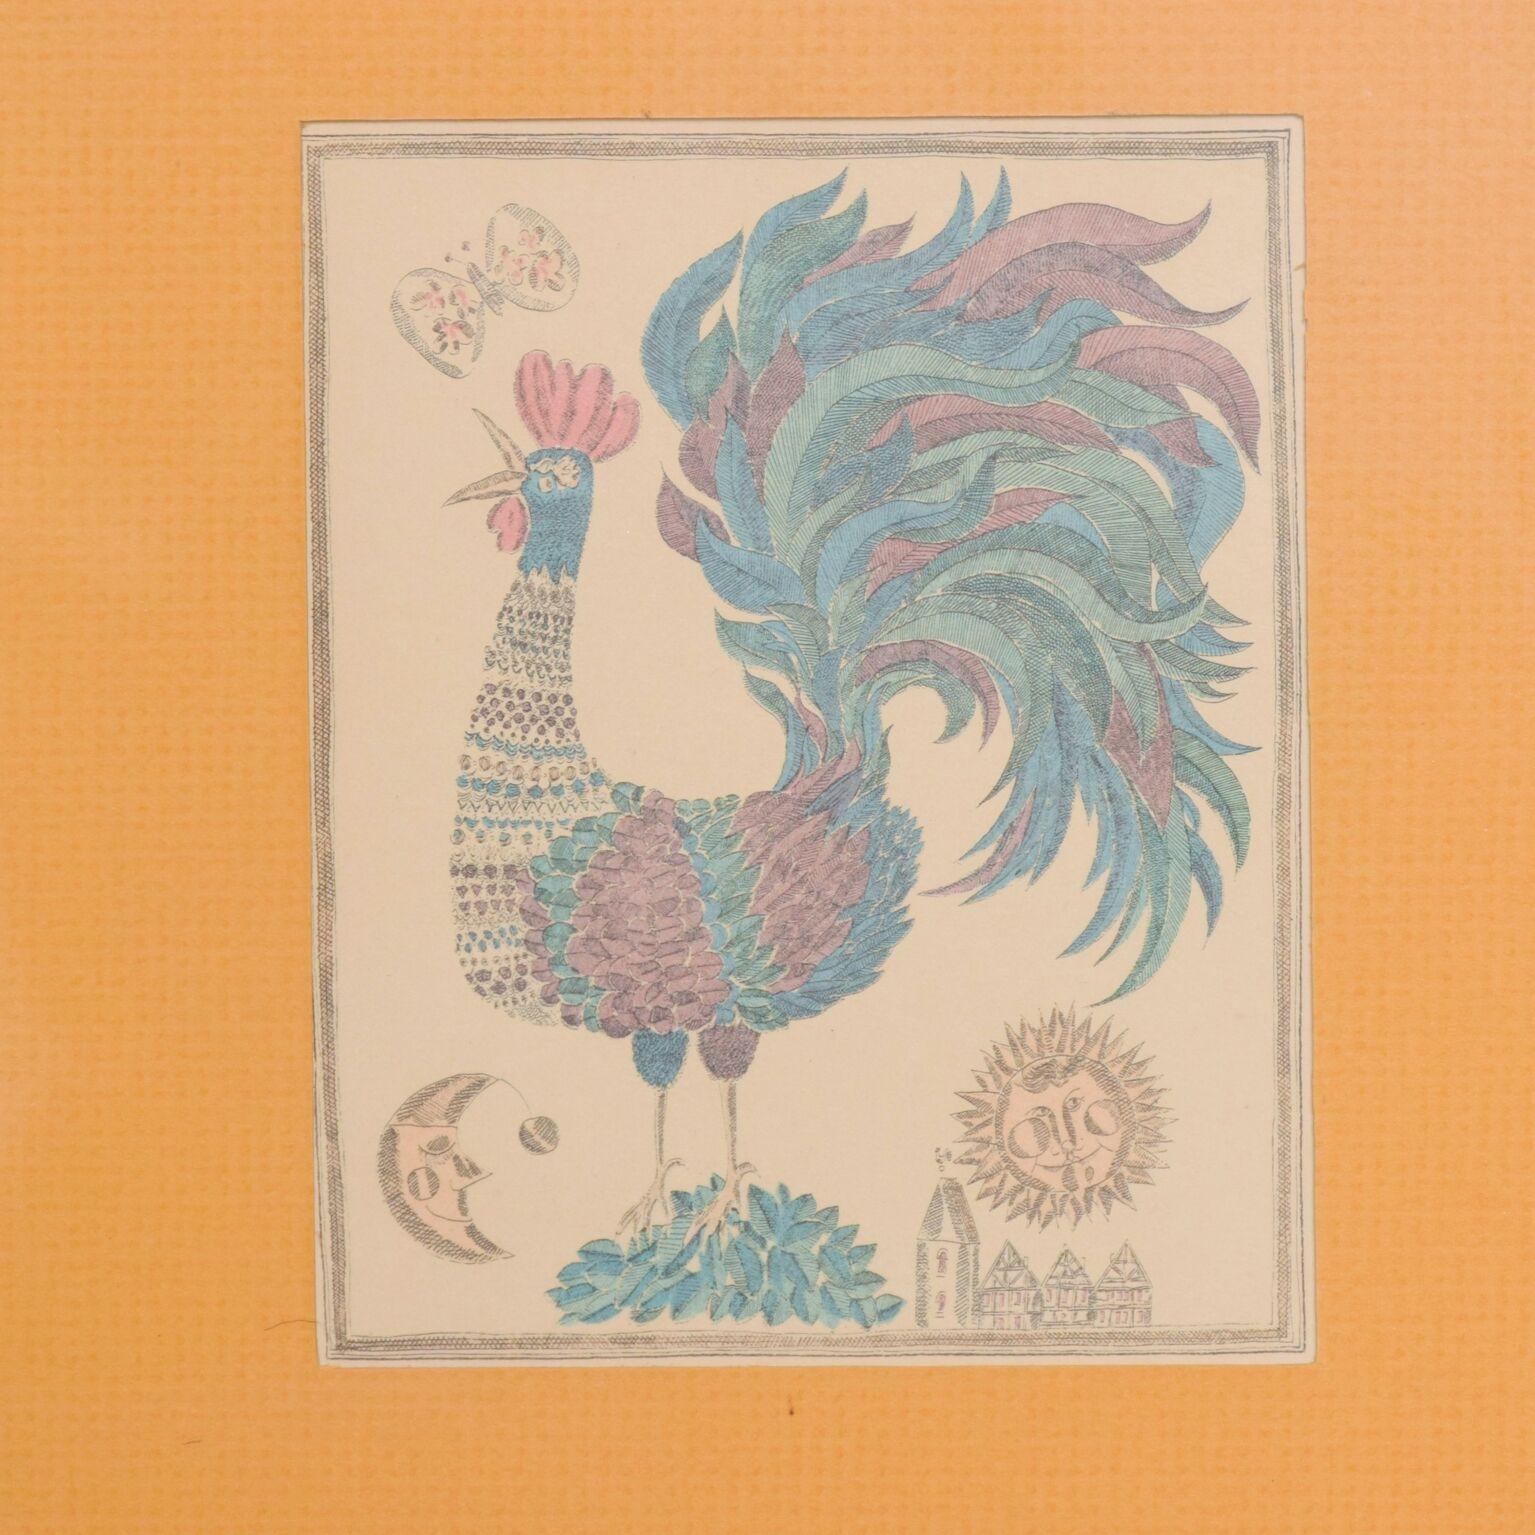  1970s Art Two Framed Prints Bright Rooster & Flower Orange Yellow In Good Condition For Sale In Chula Vista, CA